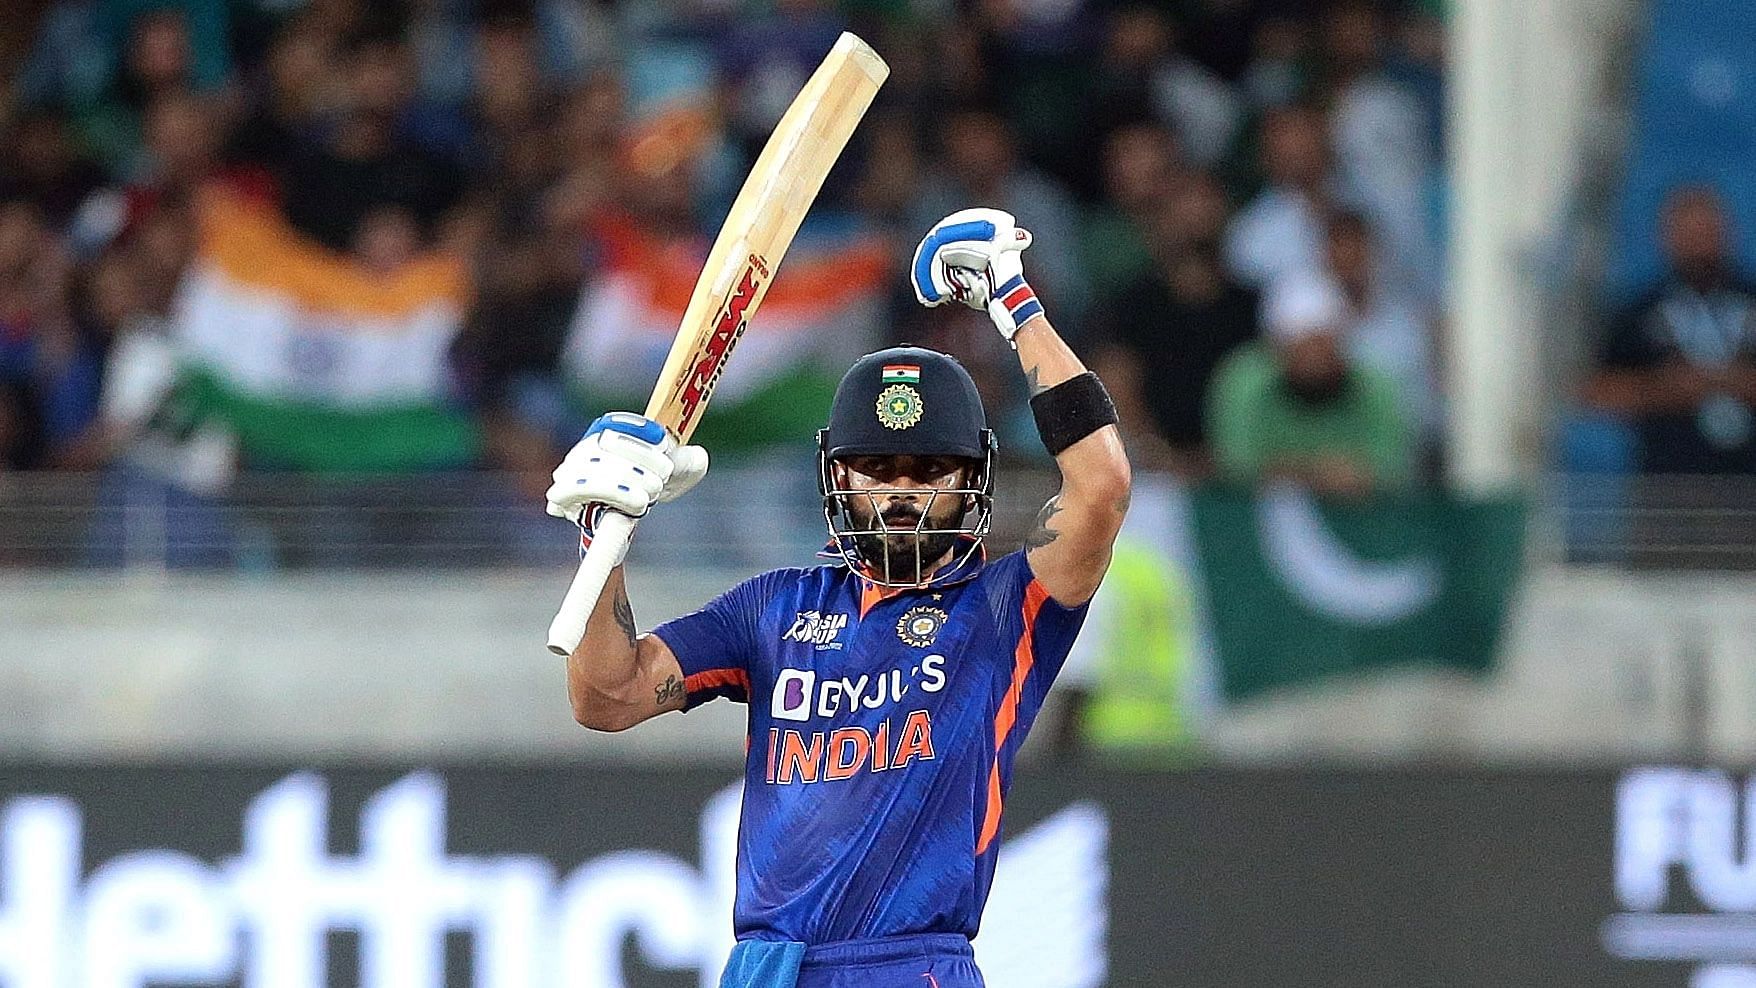 <div class="paragraphs"><p>Virat Kohli celebrates after scoring his fifty against Pakistan in the Super 4 match of Asia Cup 2022 on Sunday.&nbsp;</p></div>